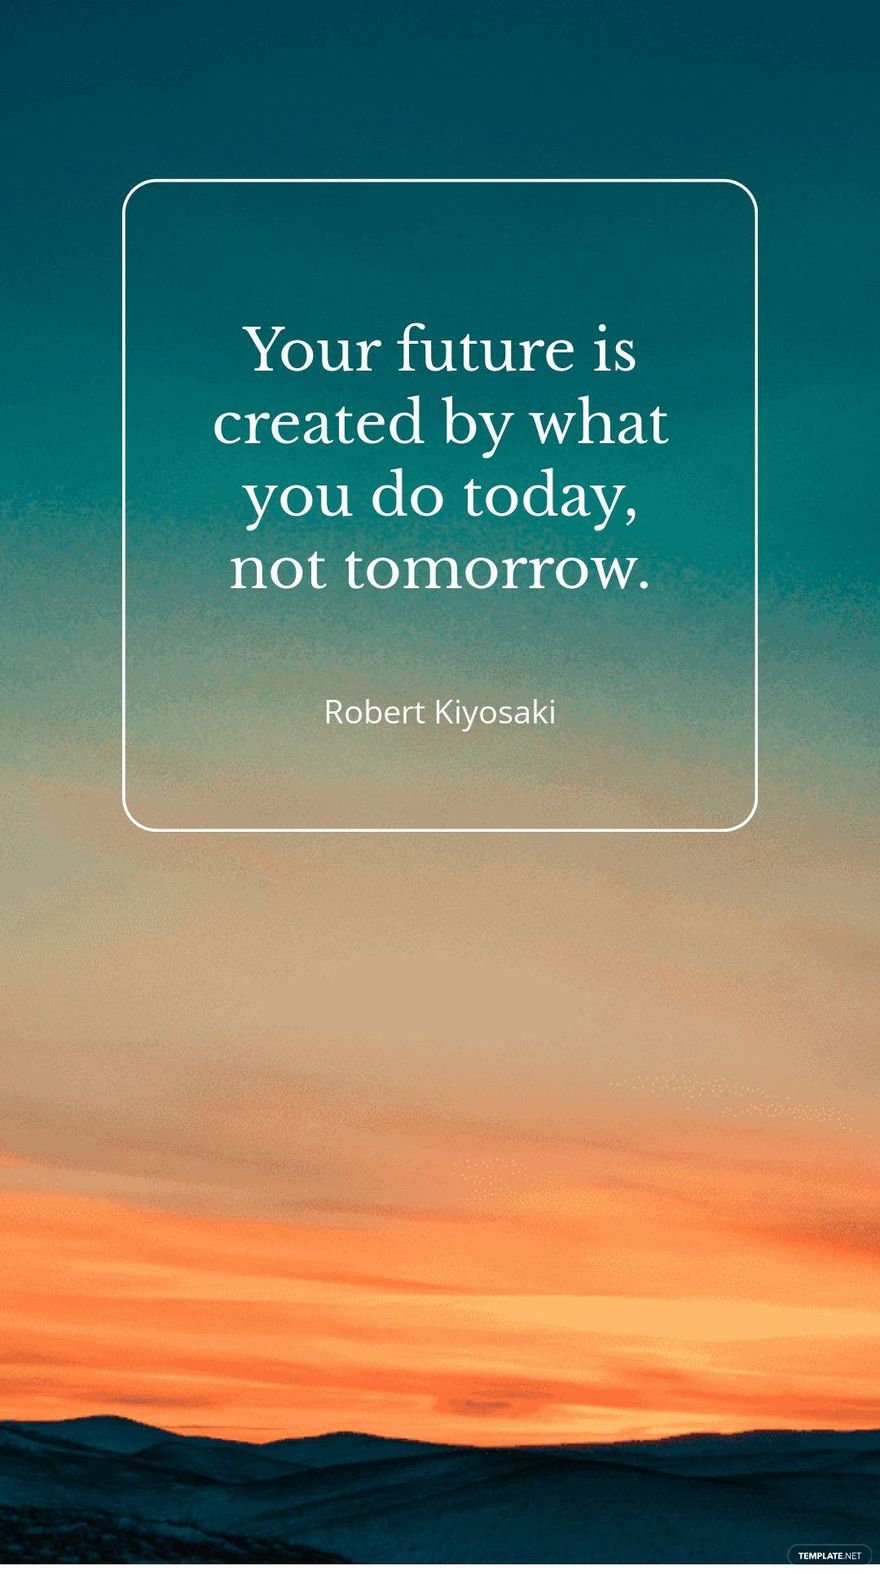 Robert Kiyosaki - Your future is created by what you do today, not tomorrow.